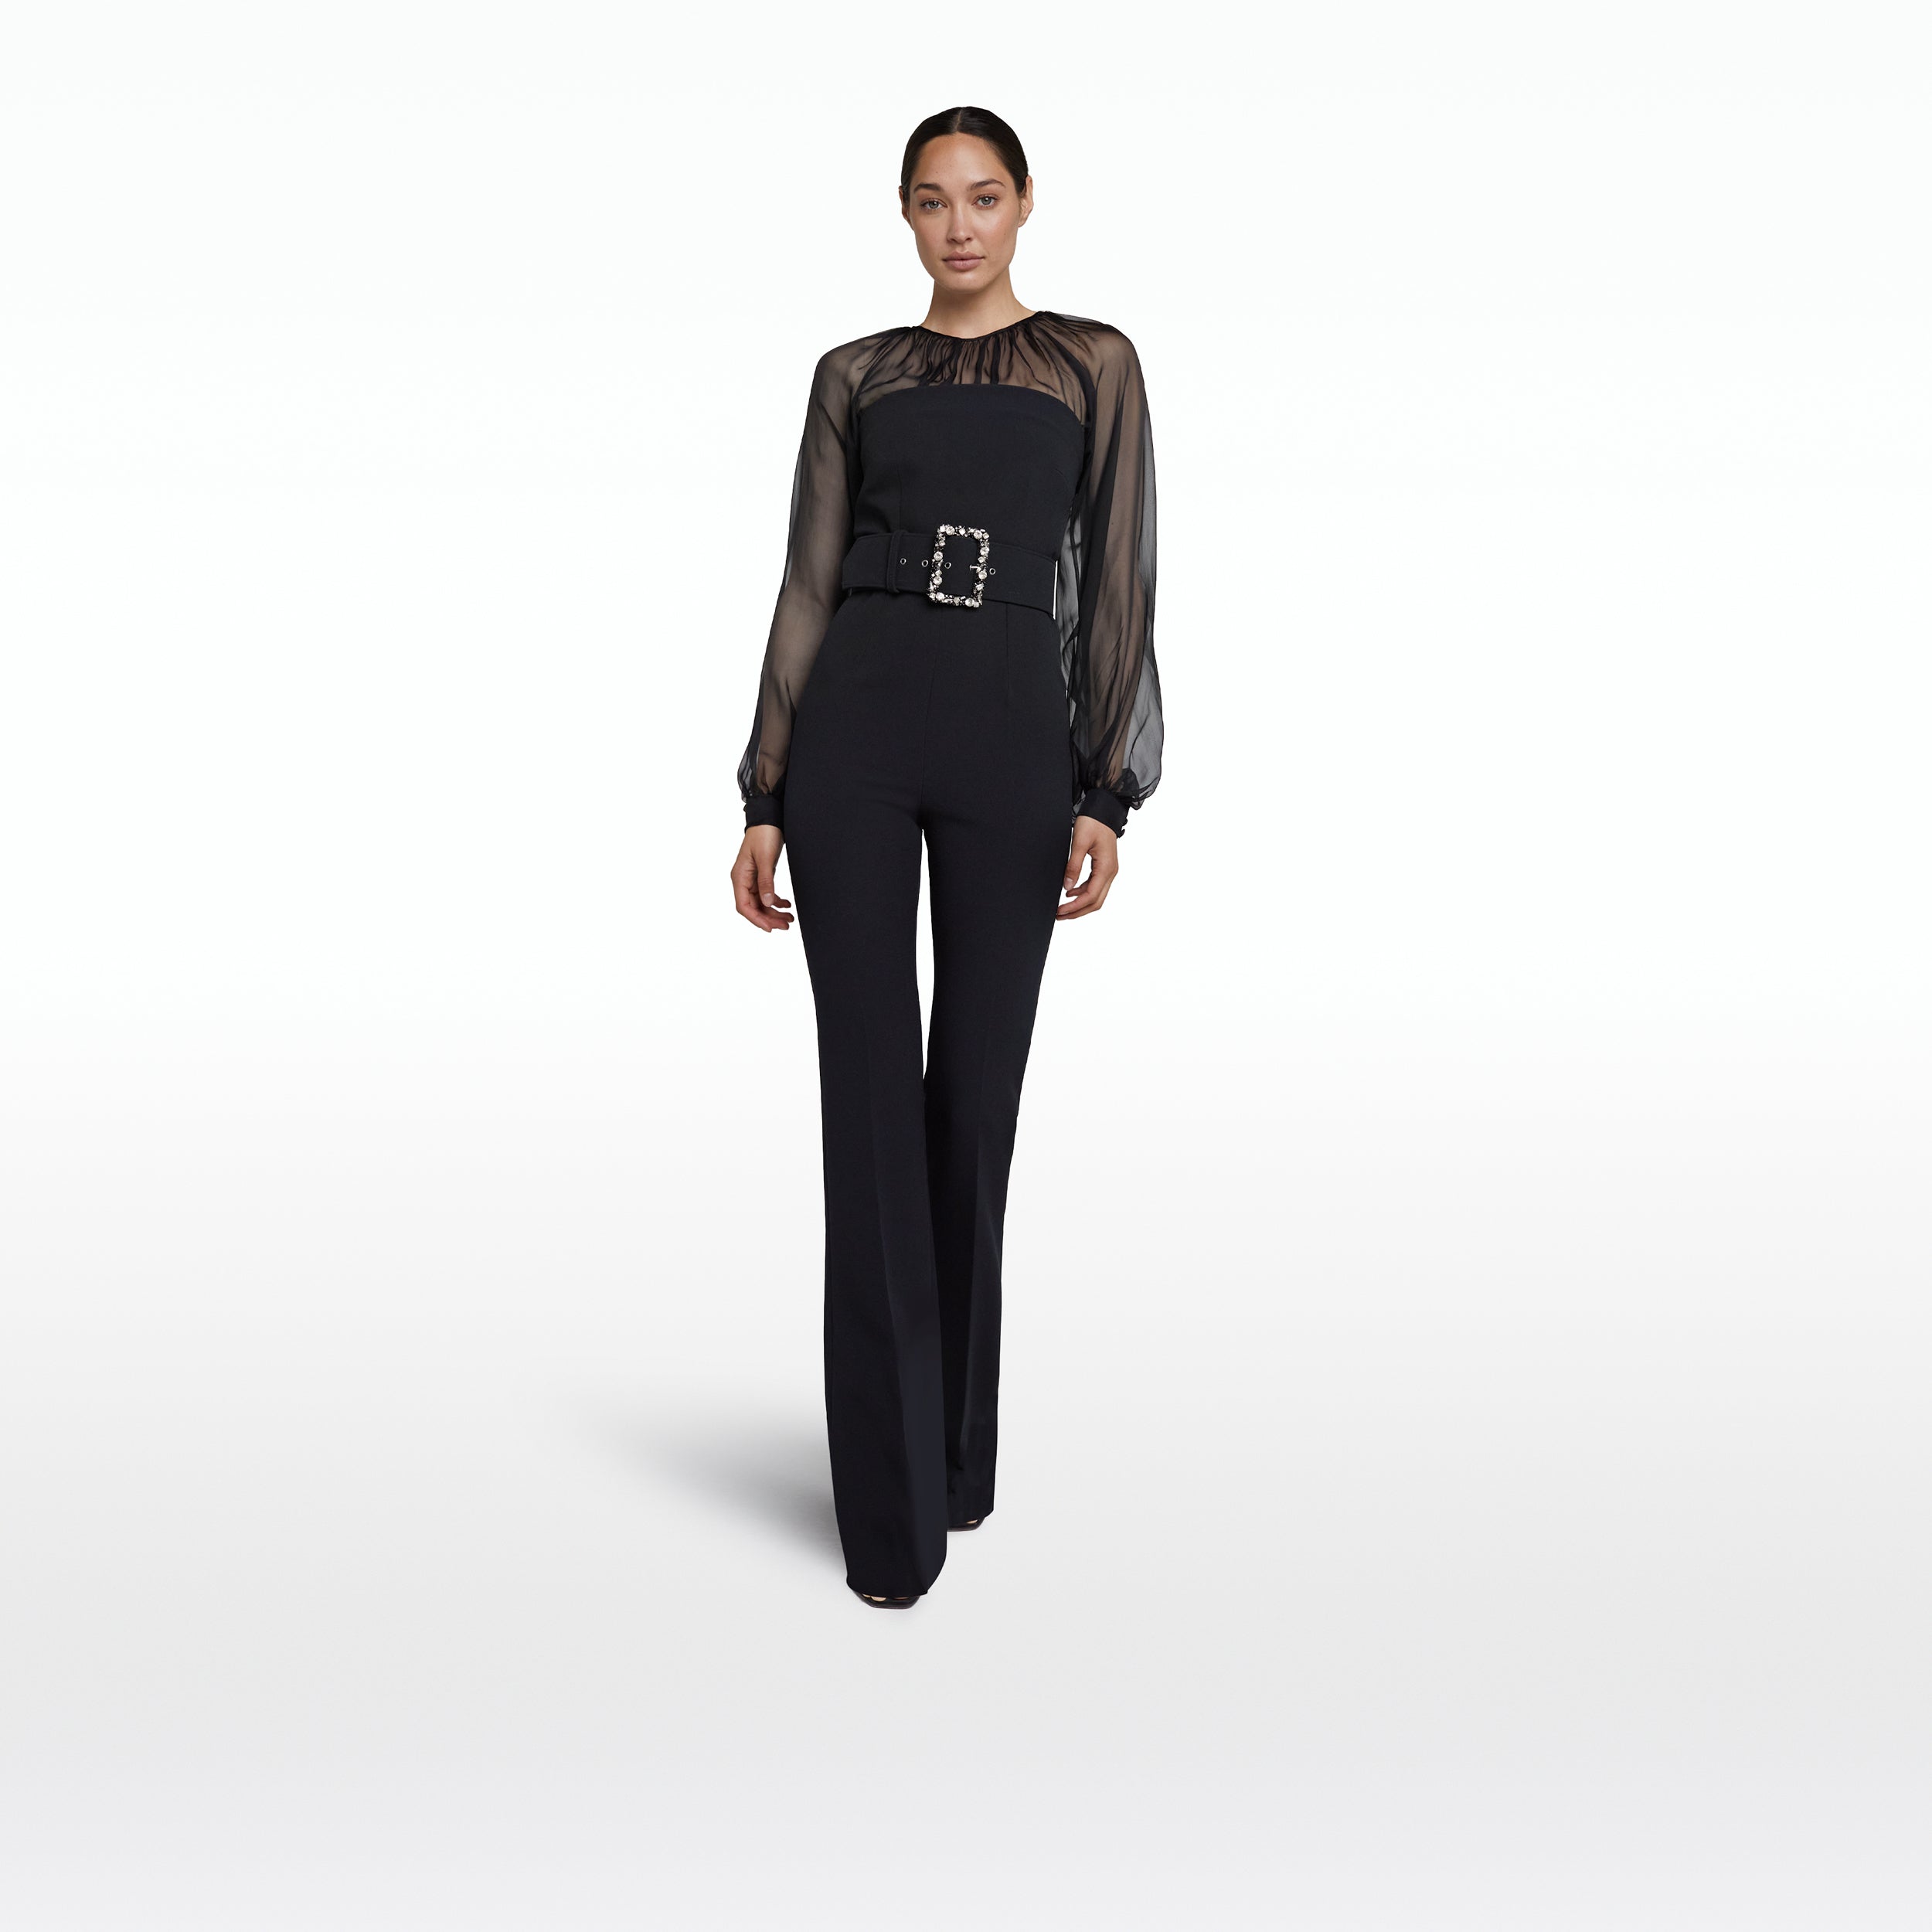 Aternia Black Jumpsuit With Embroidered Buckle Belt